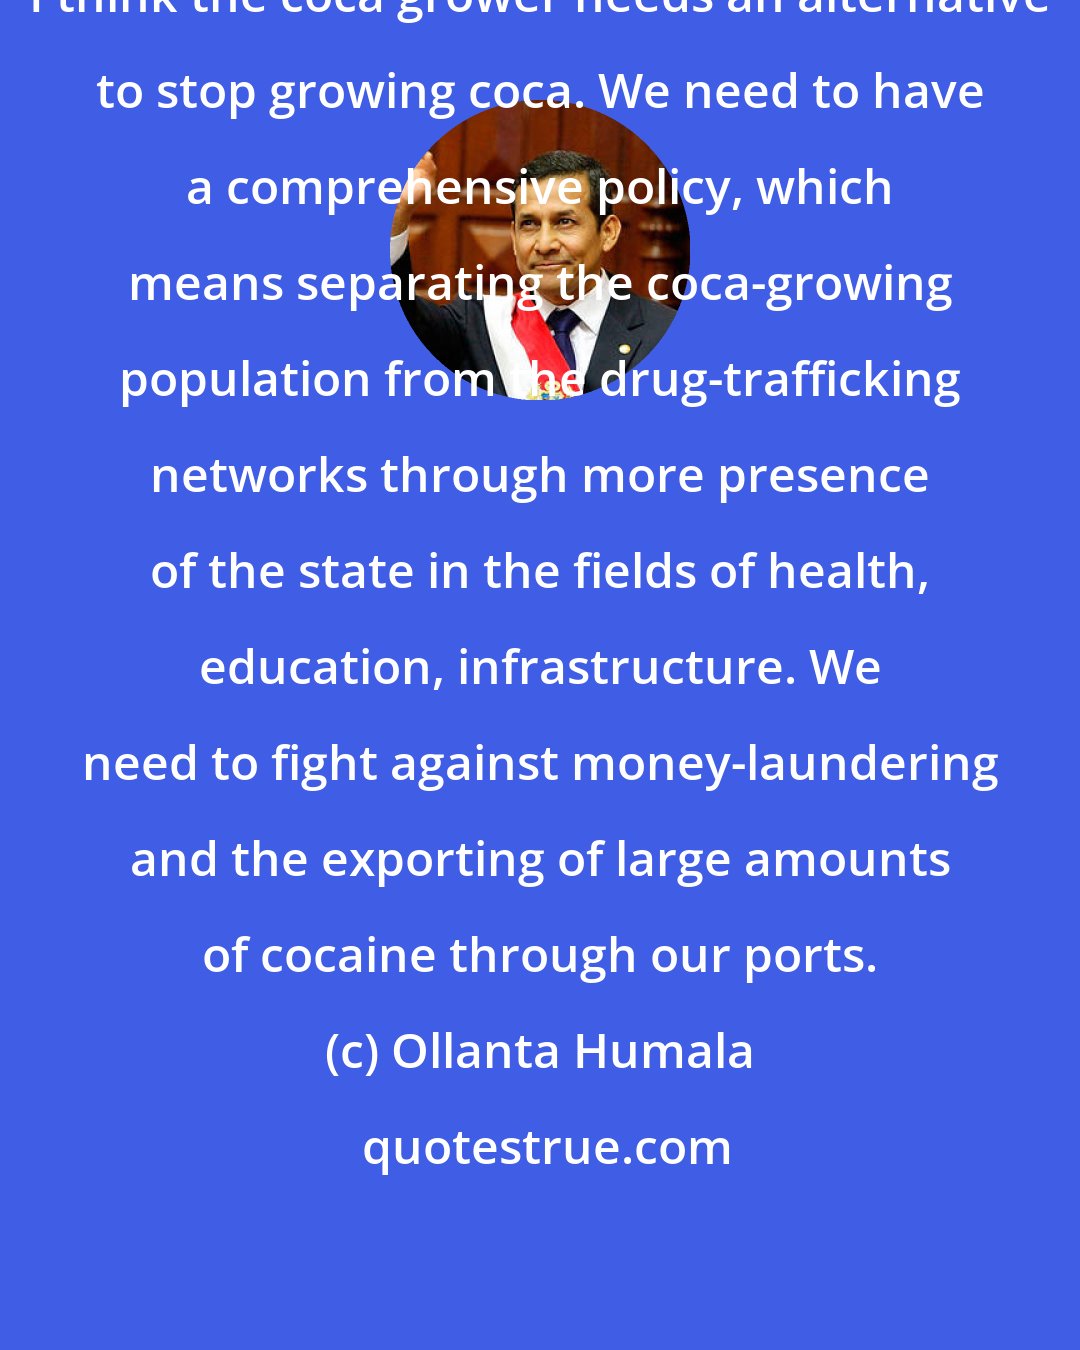 Ollanta Humala: I think the coca grower needs an alternative to stop growing coca. We need to have a comprehensive policy, which means separating the coca-growing population from the drug-trafficking networks through more presence of the state in the fields of health, education, infrastructure. We need to fight against money-laundering and the exporting of large amounts of cocaine through our ports.